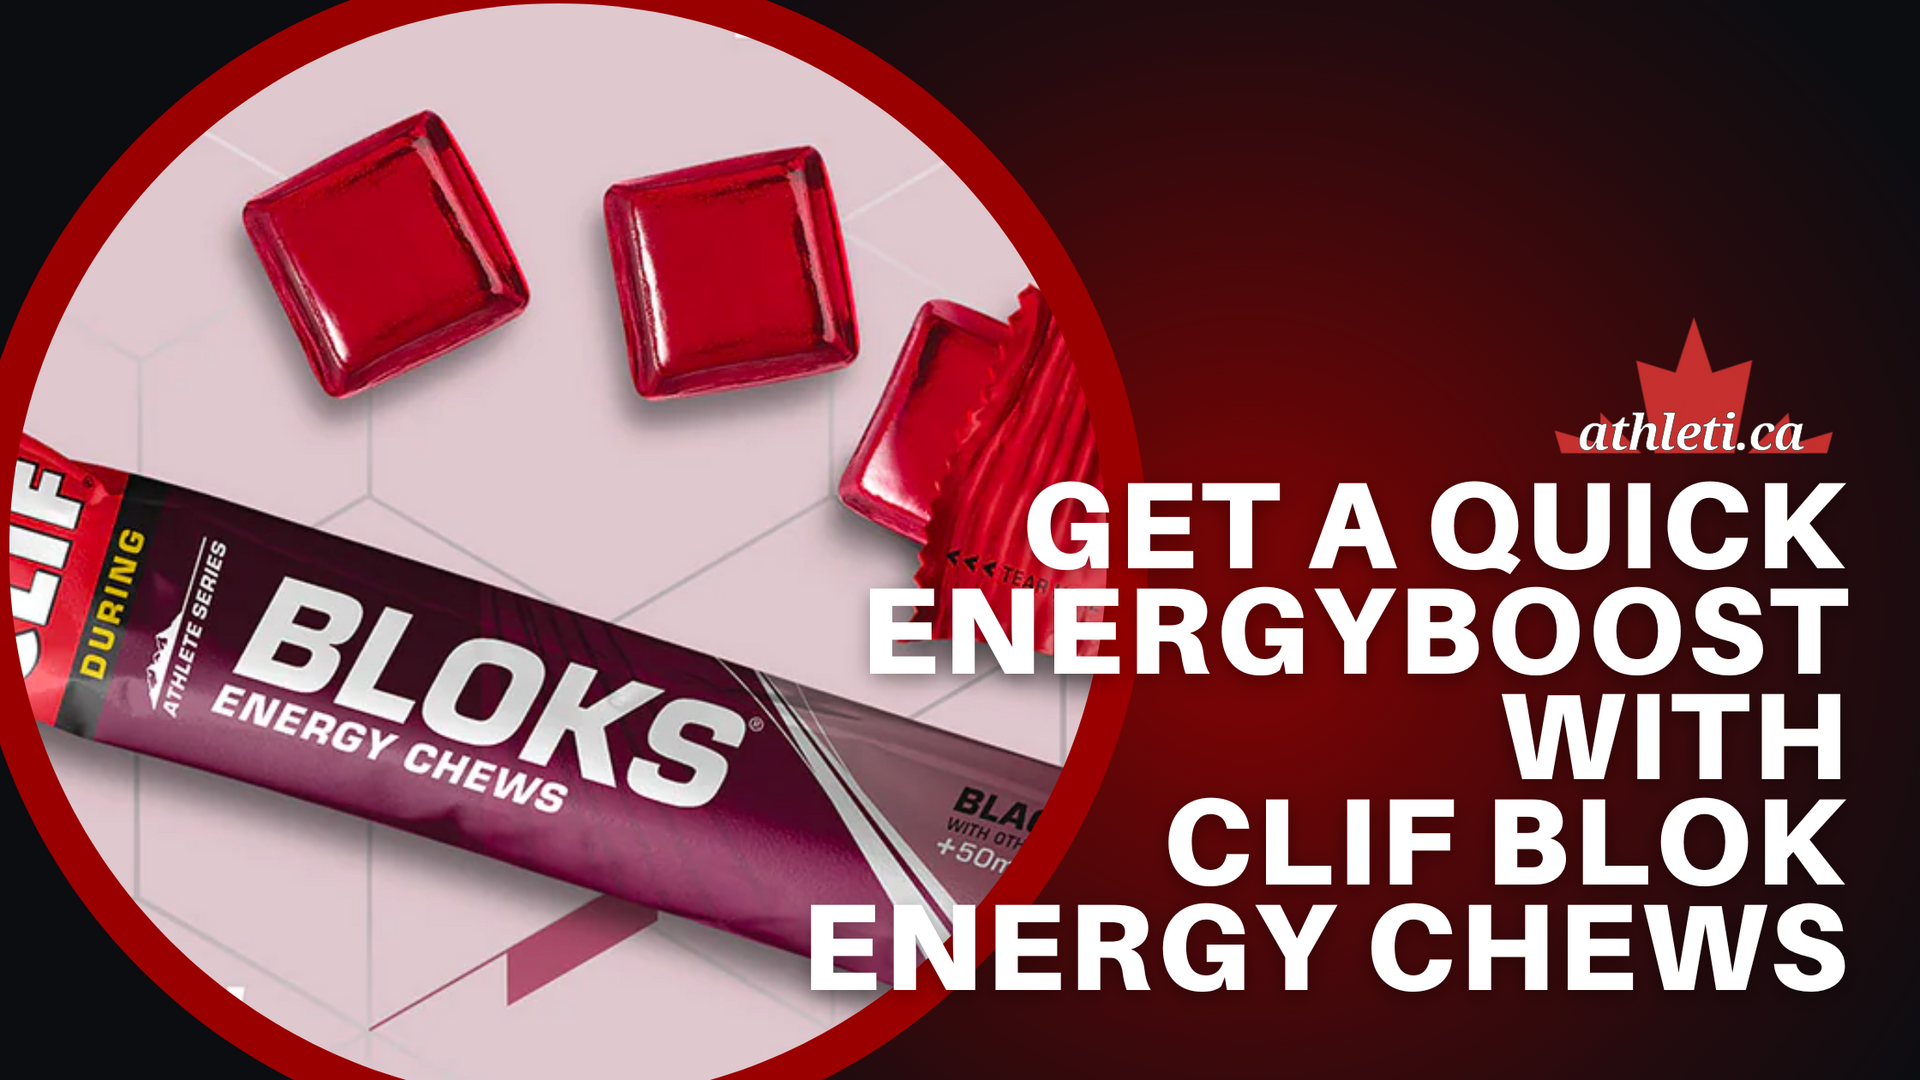 Get a Quick Energy Boost with CLIF Blok Energy Chews